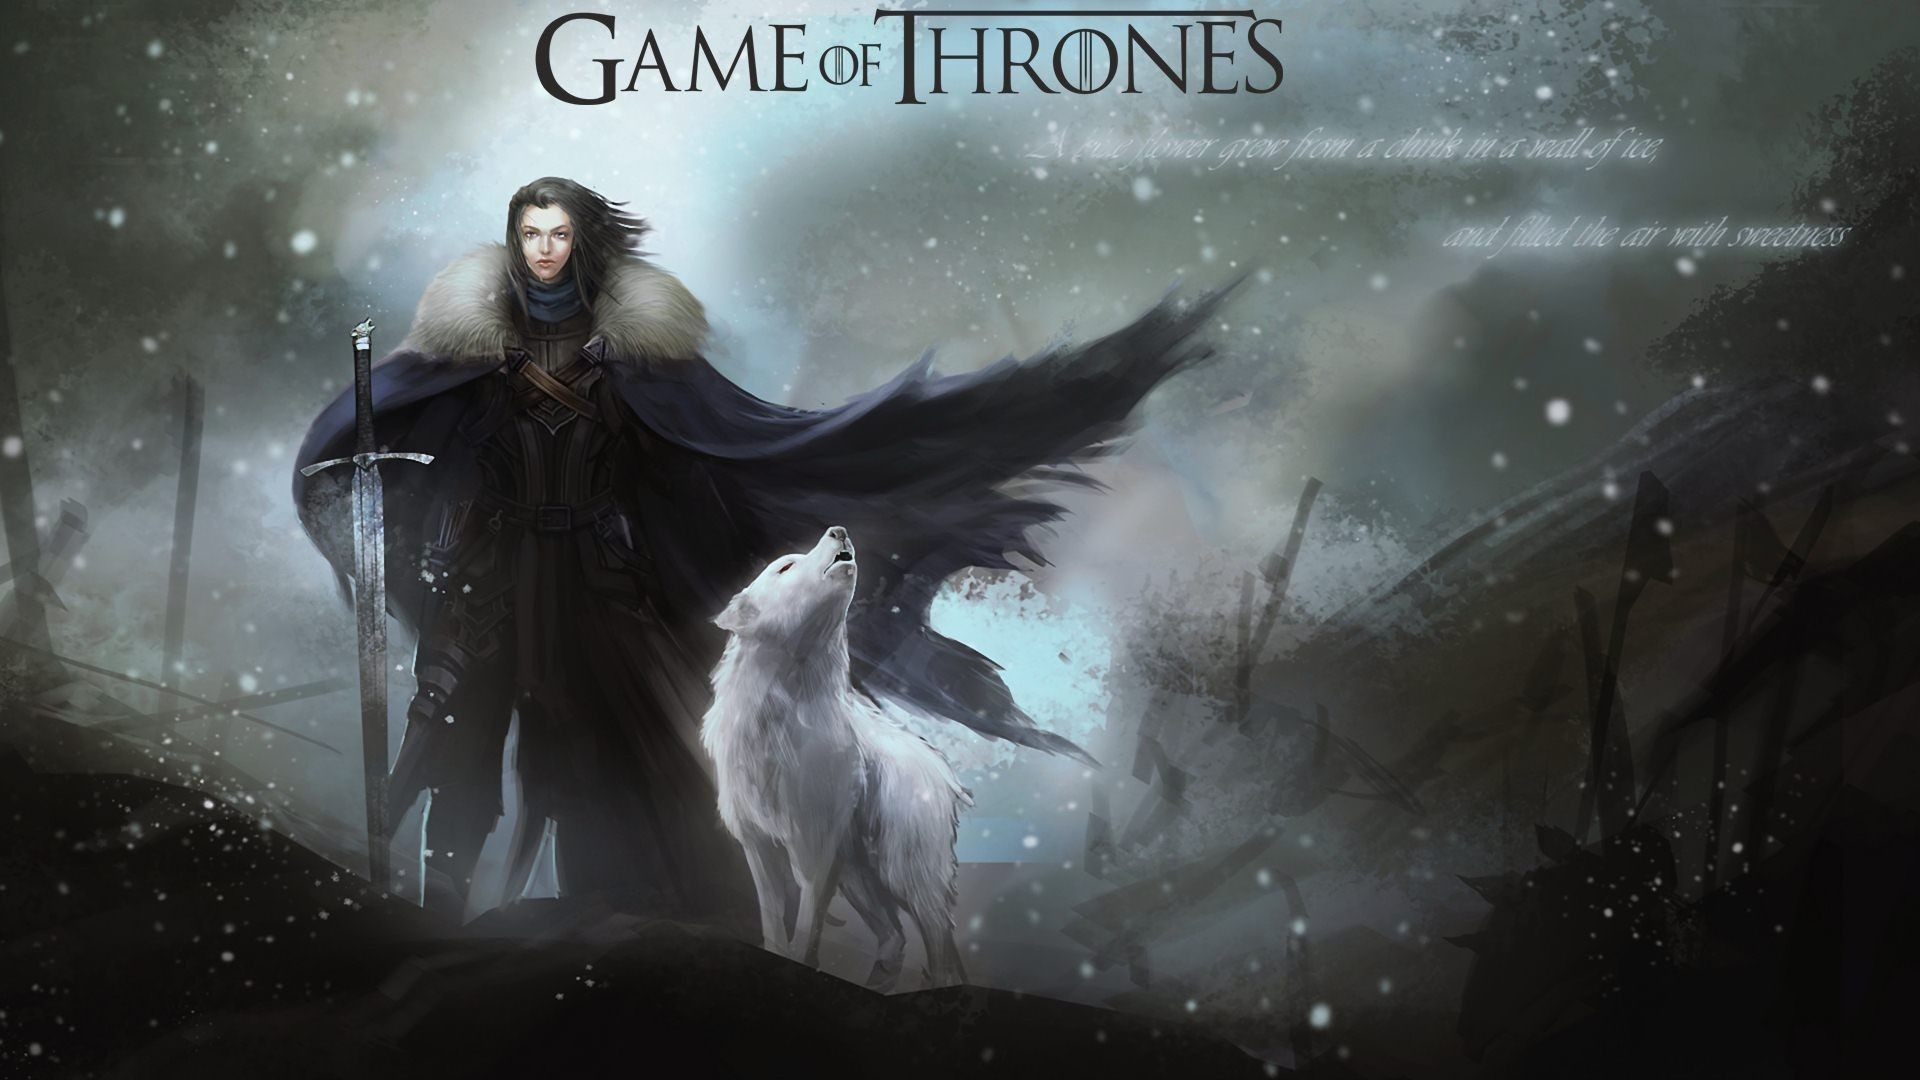 1920x1080 Game Of Thrones Fan Art Wallpaper,Images,Pictures,Photos,HD Wallpapers